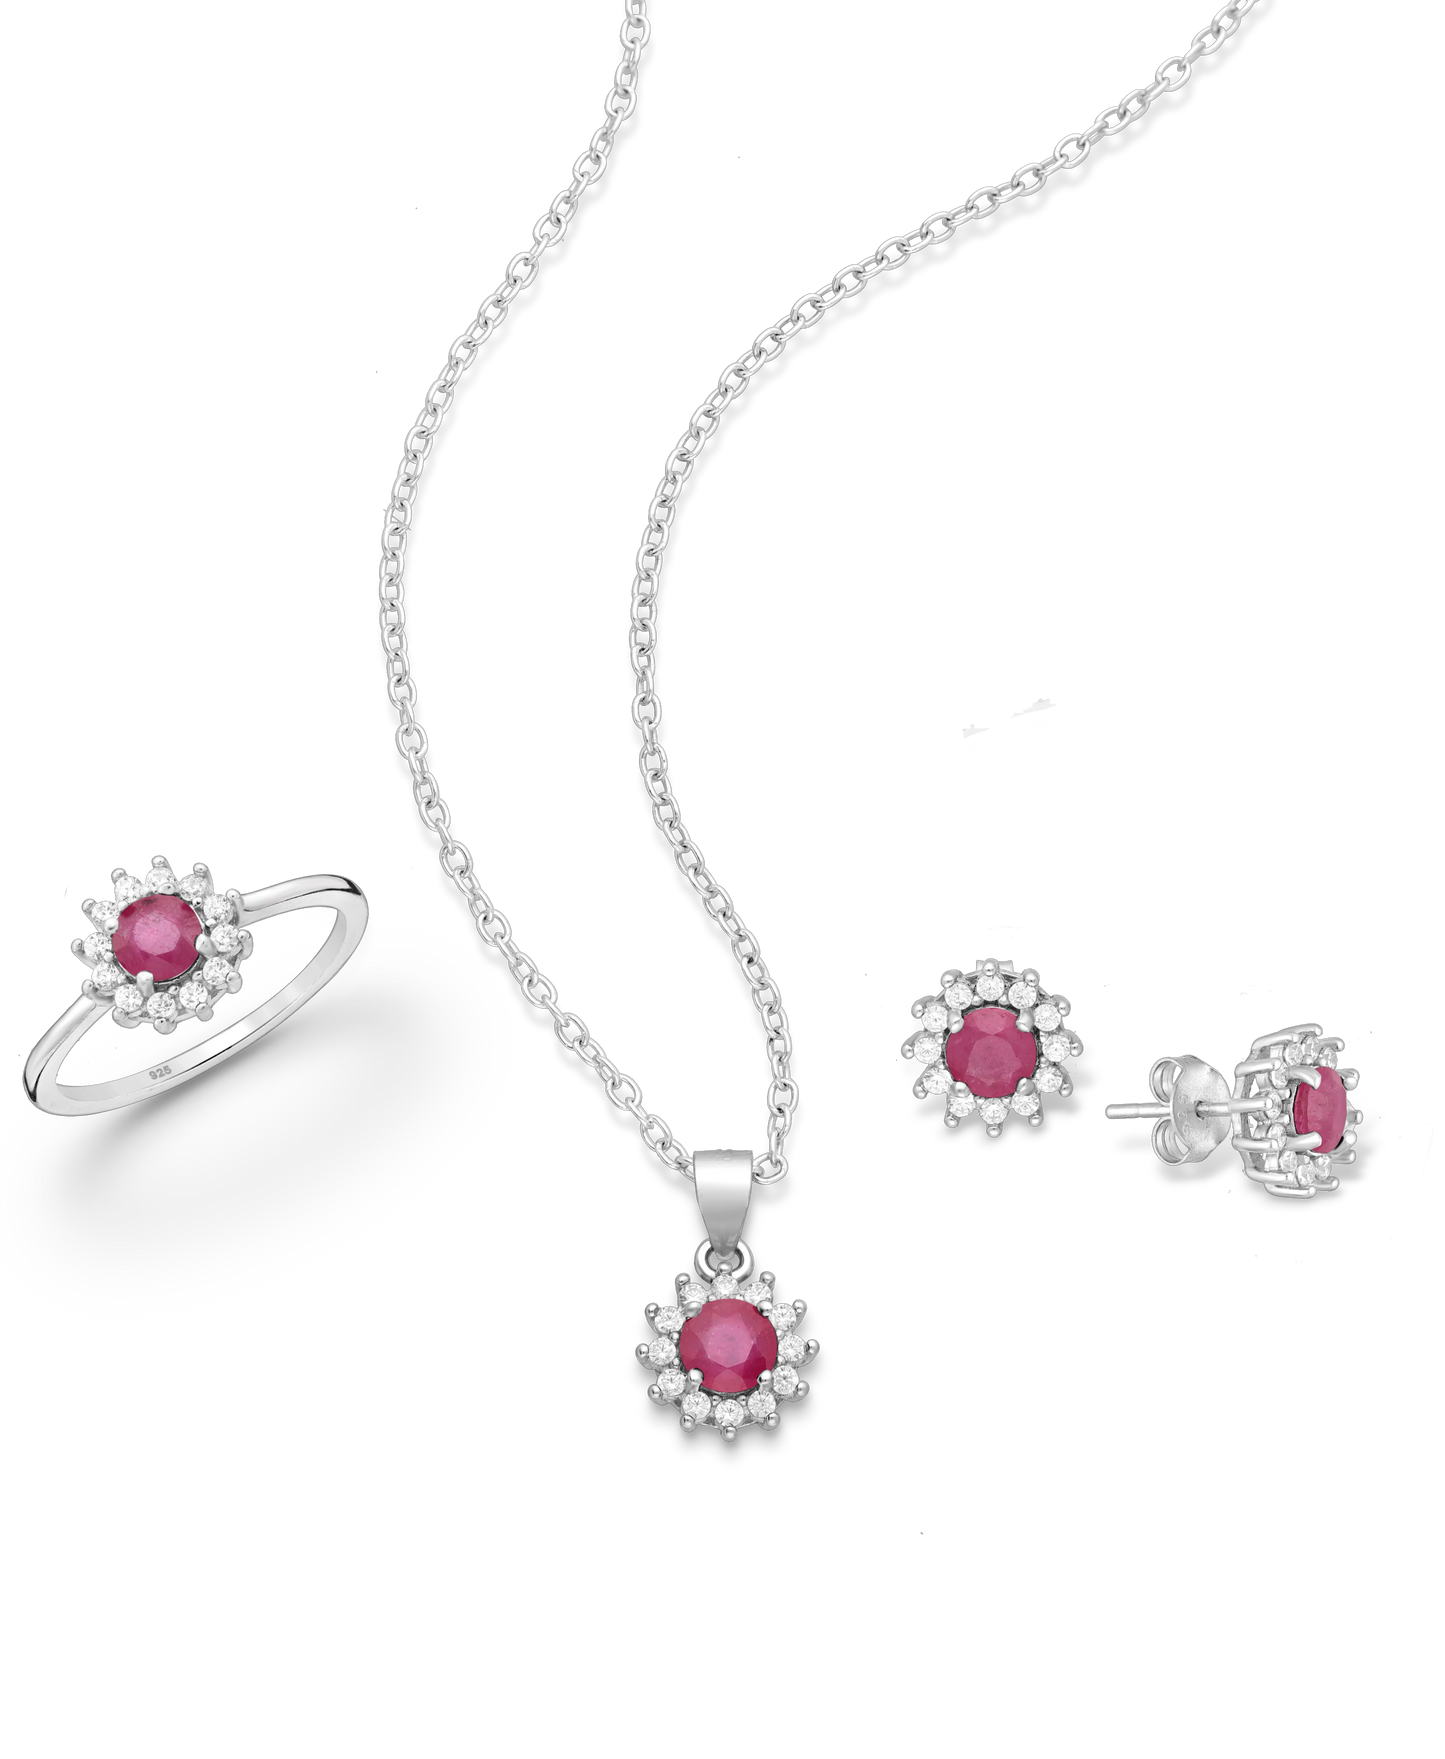 Genuine Ruby Sterling Silver Push-Back Earrings, Pendant and Ring Set